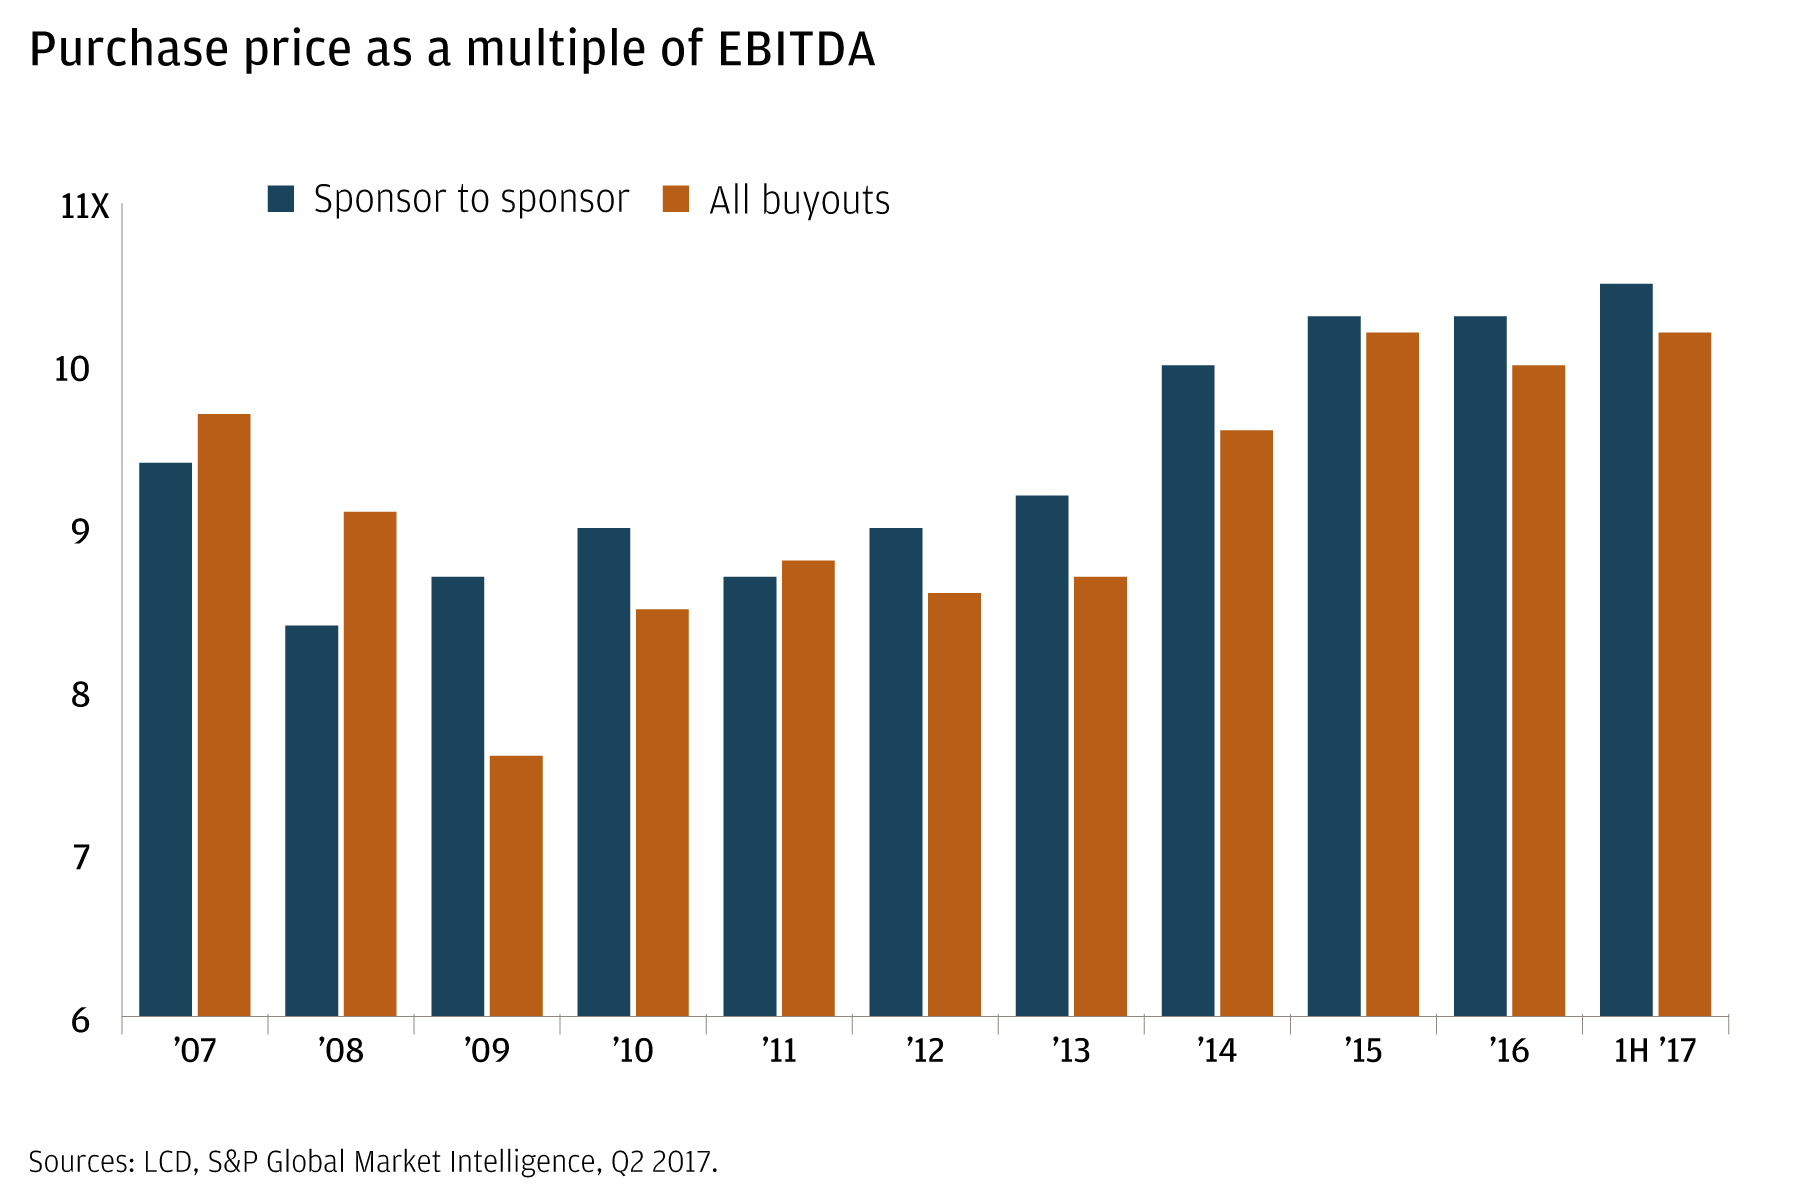 Bar chart showing purchase price as a multiple of EBITDA for sponsor-to-sponsor and all buyouts, 2007–1H 2017